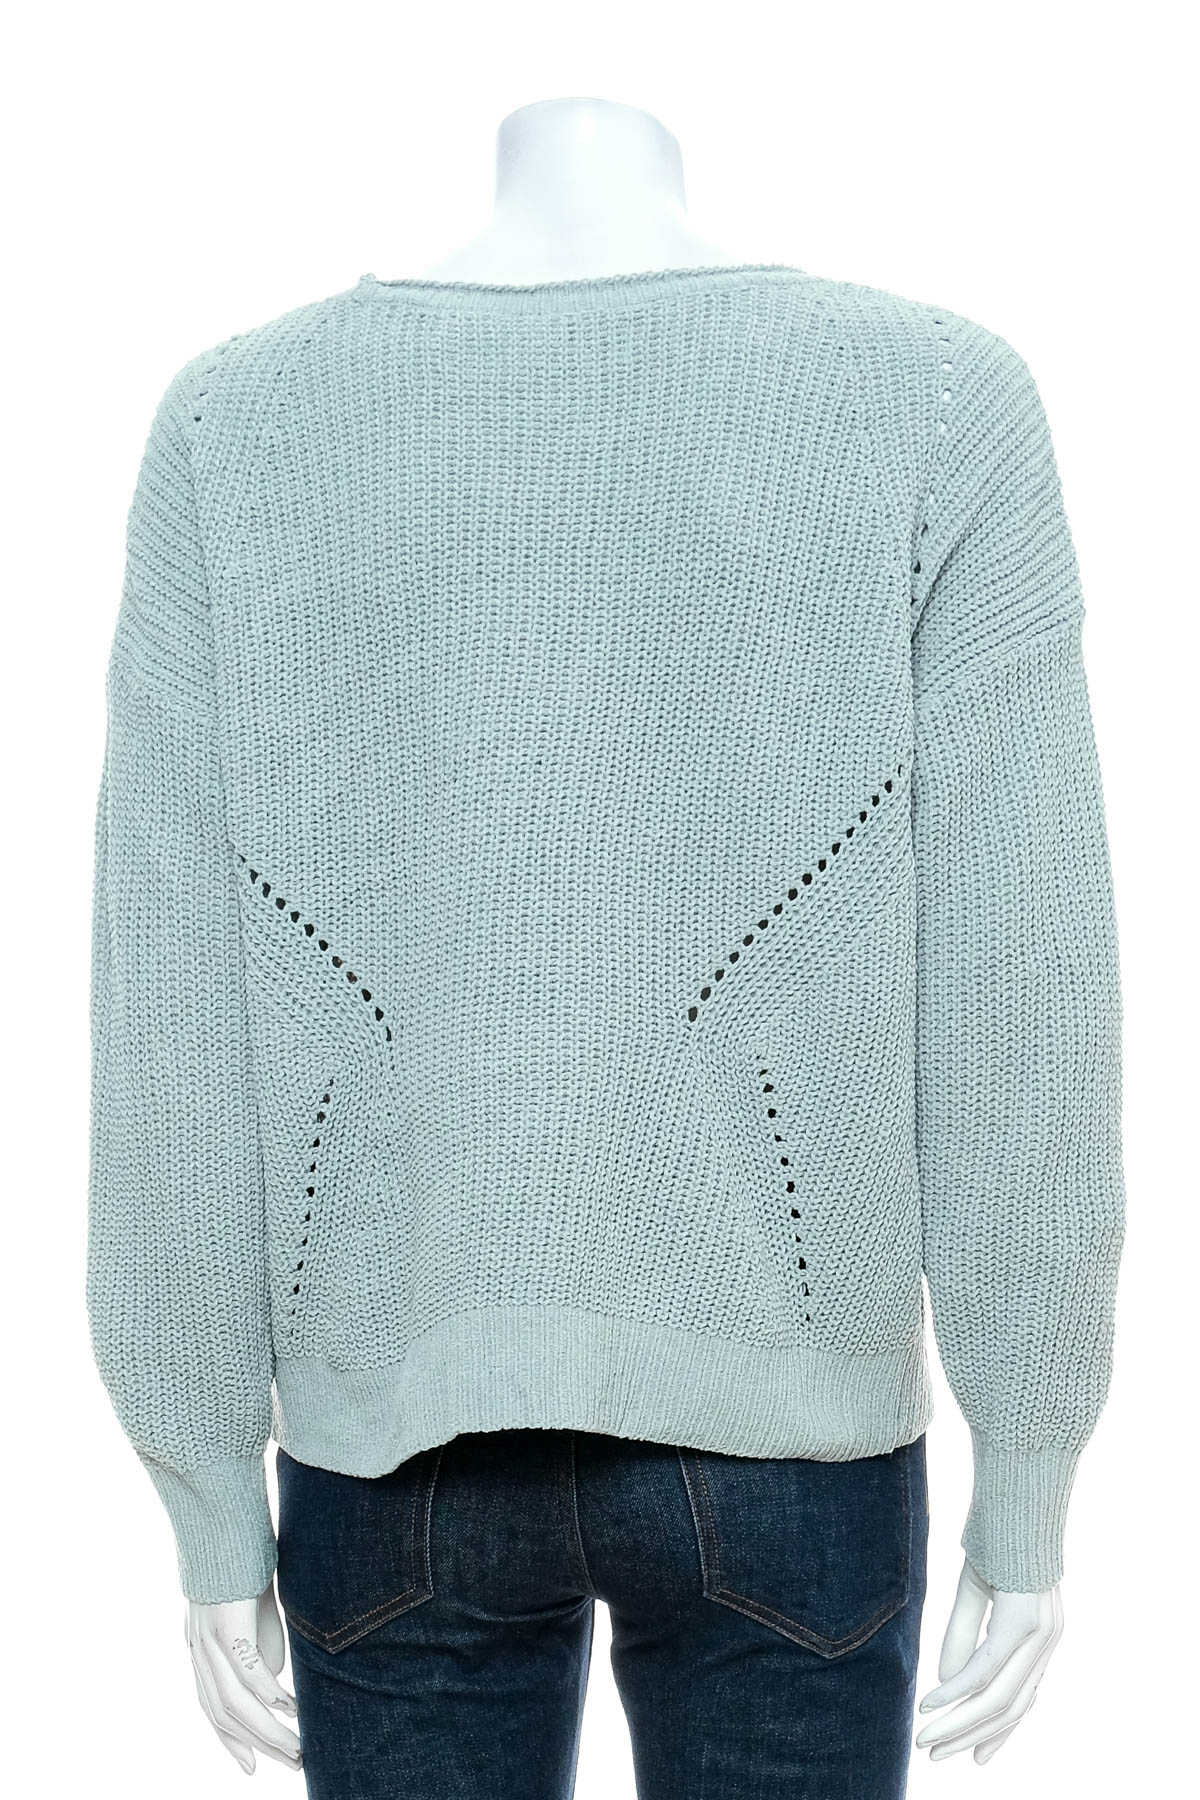 Women's sweater - Abercrombie & Fitch - 1